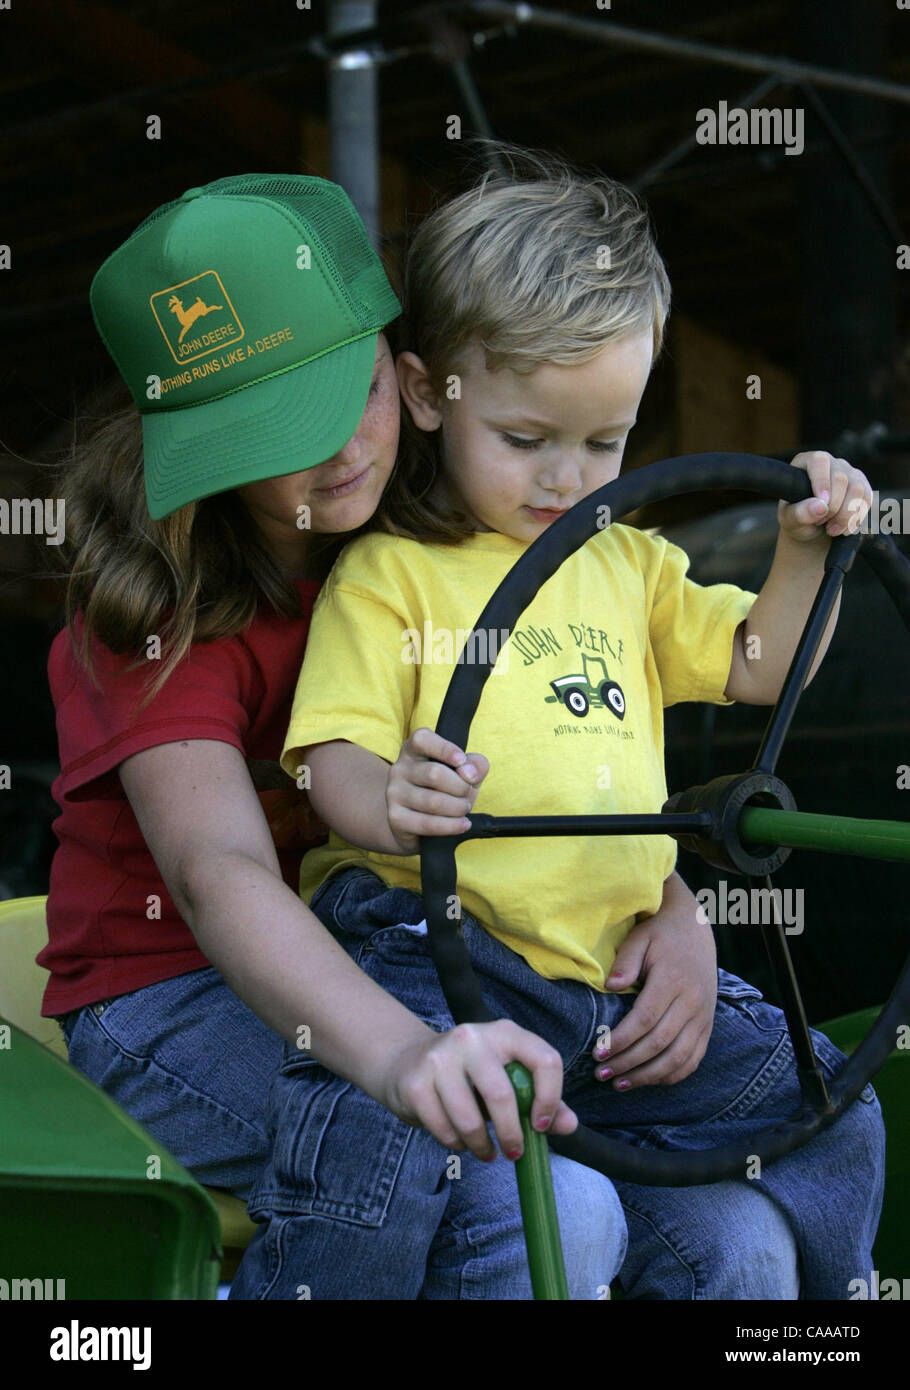 Stephanie Cheesman(cq), left, 11 and brother Cole Cheesman(cq), 2, play on their father's 1940 Model A John Deere tractor during the Antique Gas and Steam Engine Museum Summer Harvest Fair in Vista, CA.  The family is from Yucaipa, CA.  UT/John Gastaldo Stock Photo